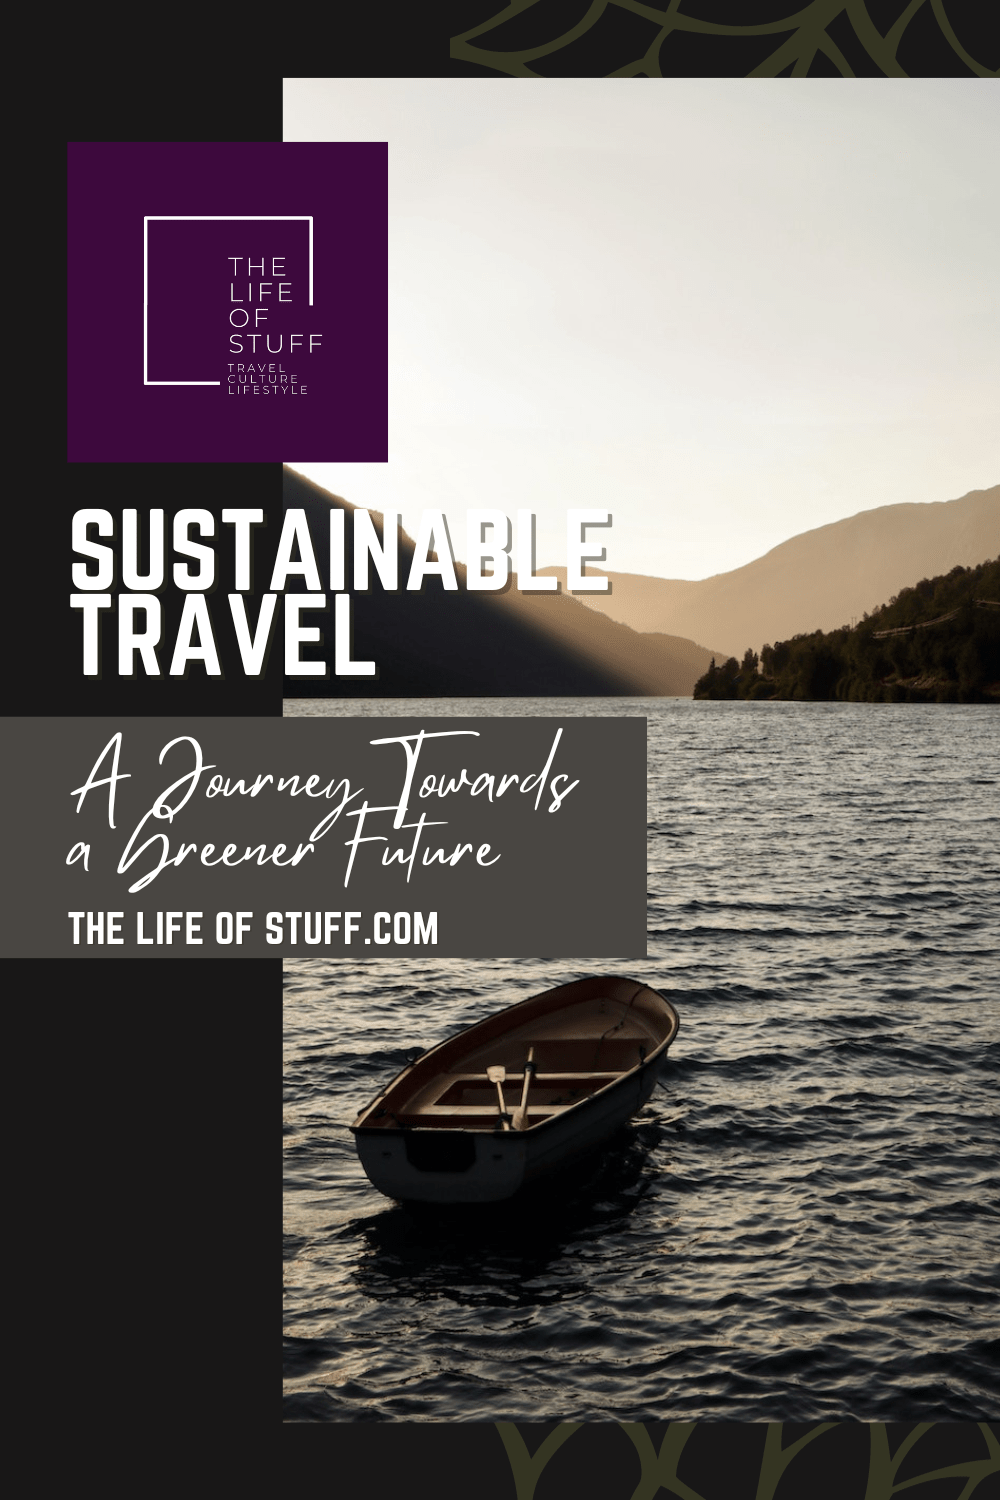 Embracing Sustainable Travel - Towards a Greener Future - The Life of Stuff